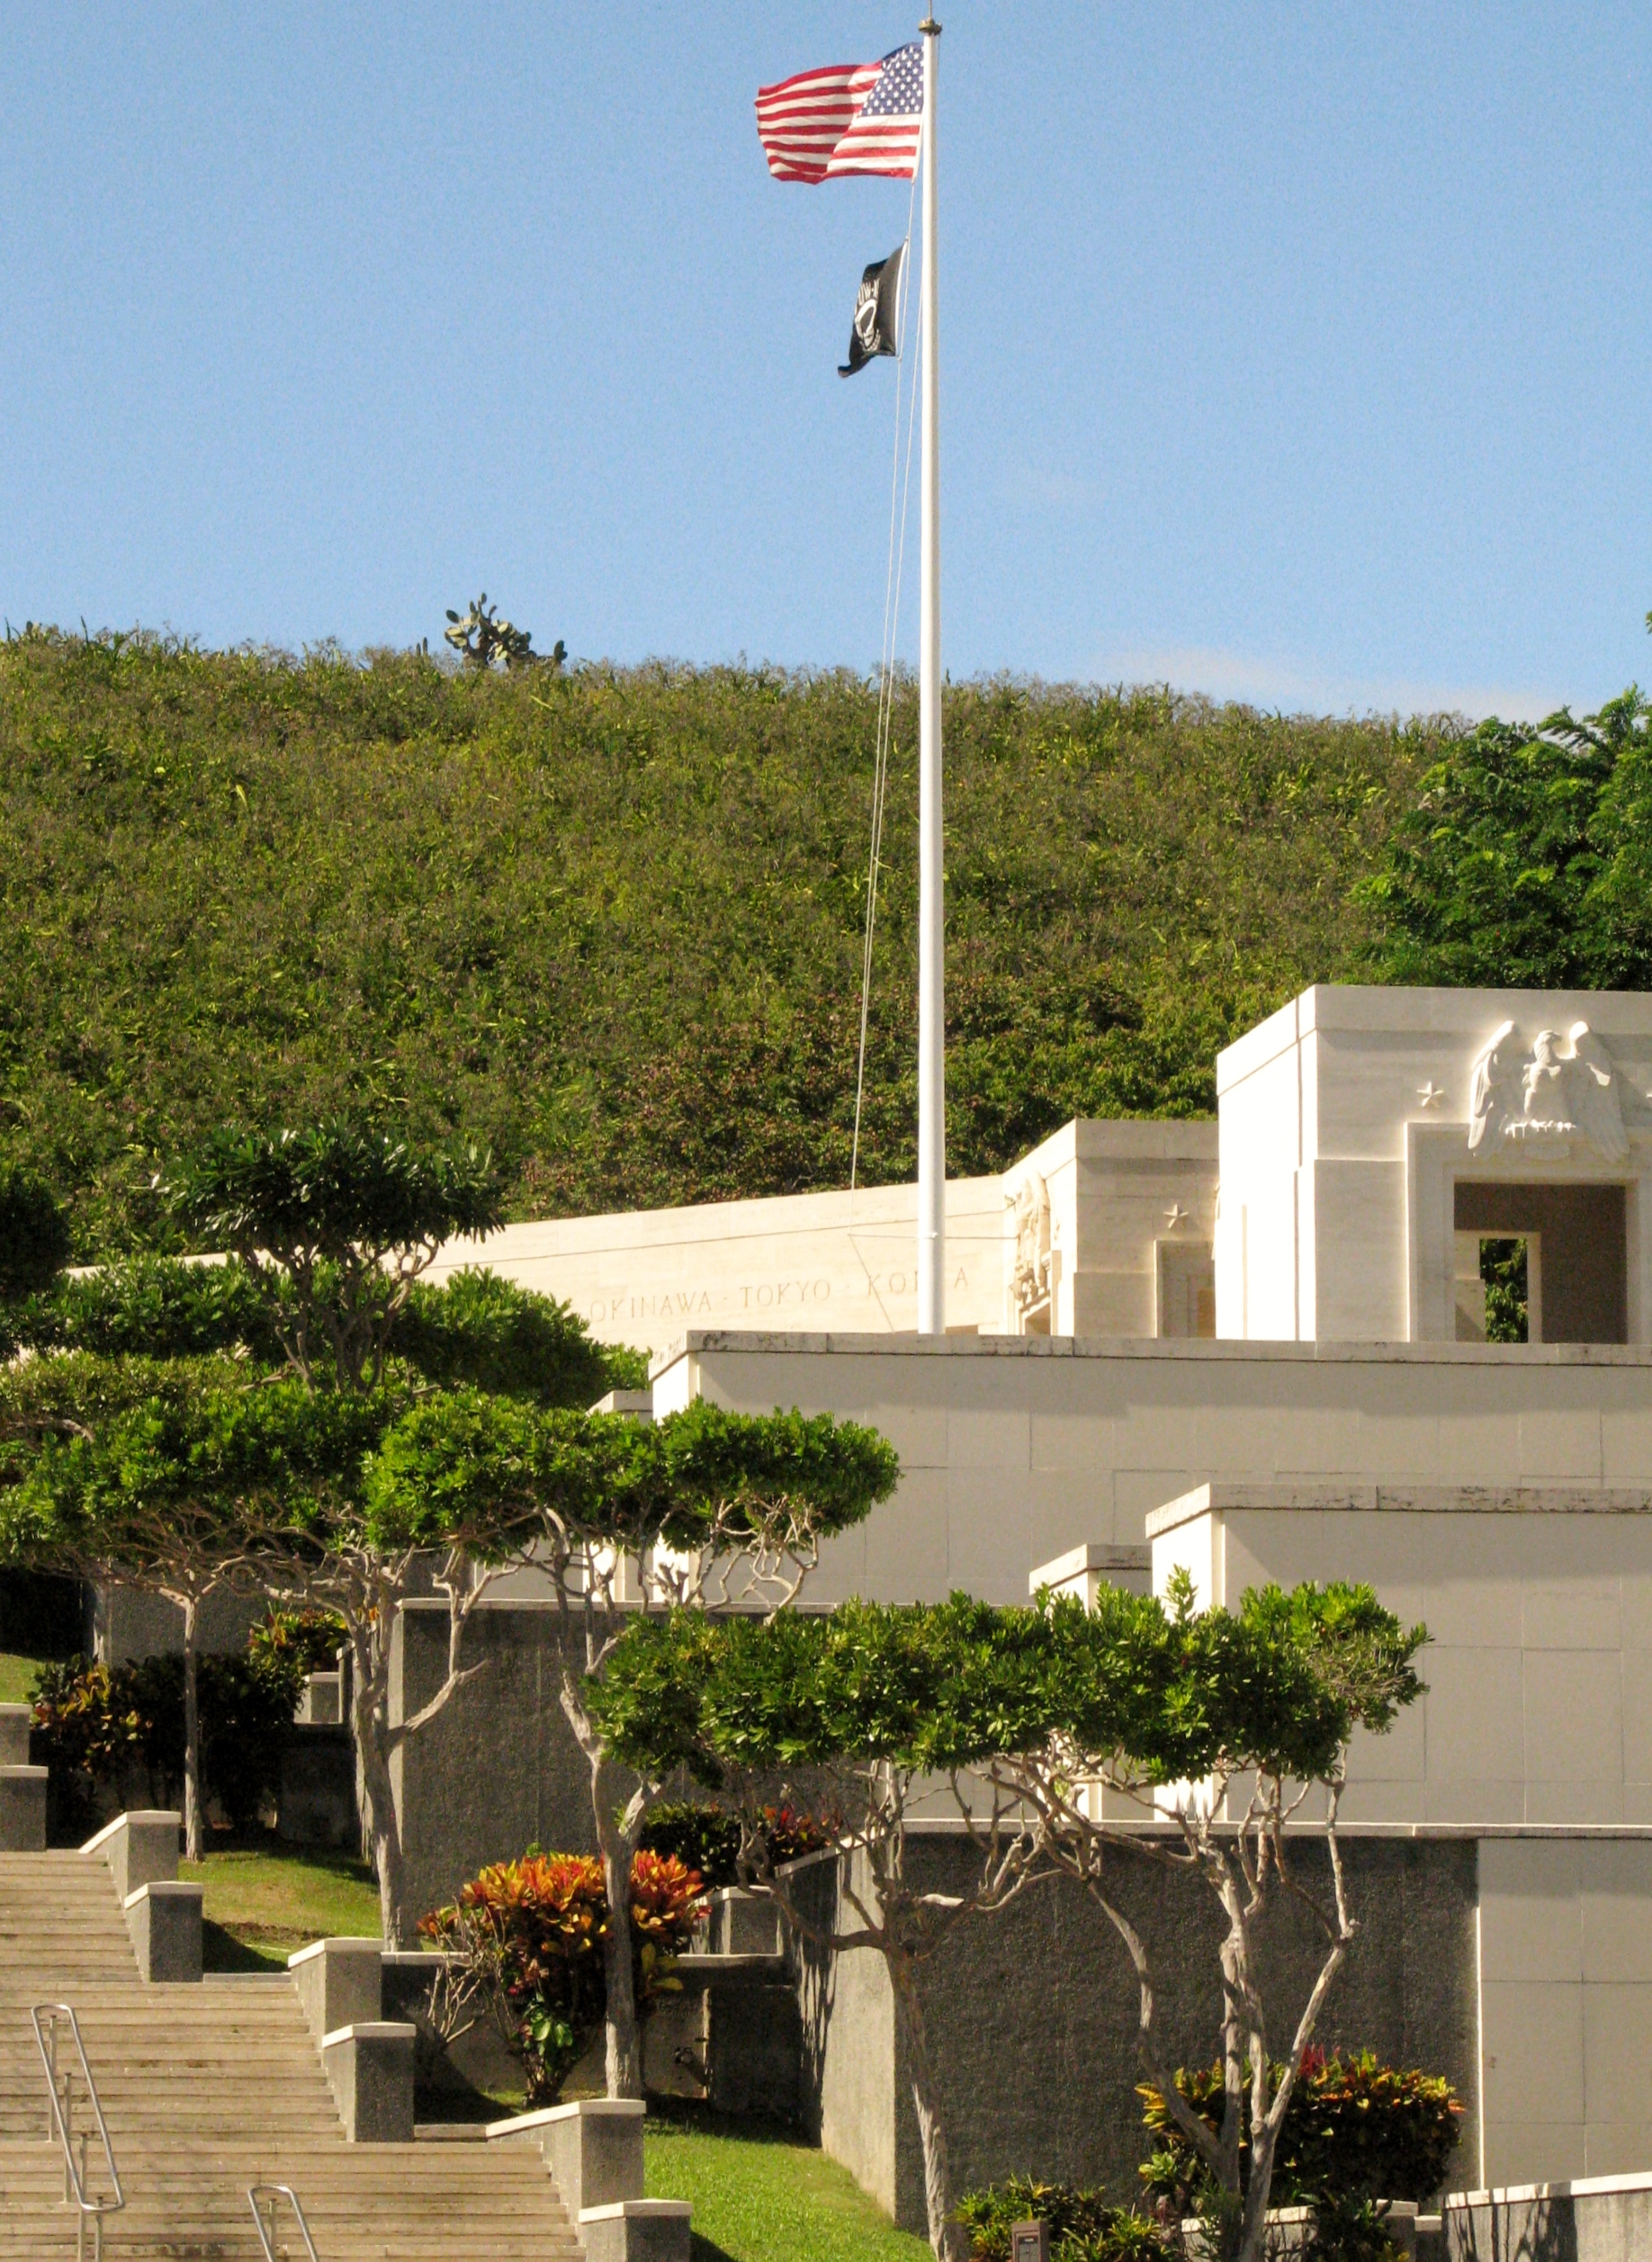 The memorial contains a small chapel and tribute to the various battles fought in the Pacific.